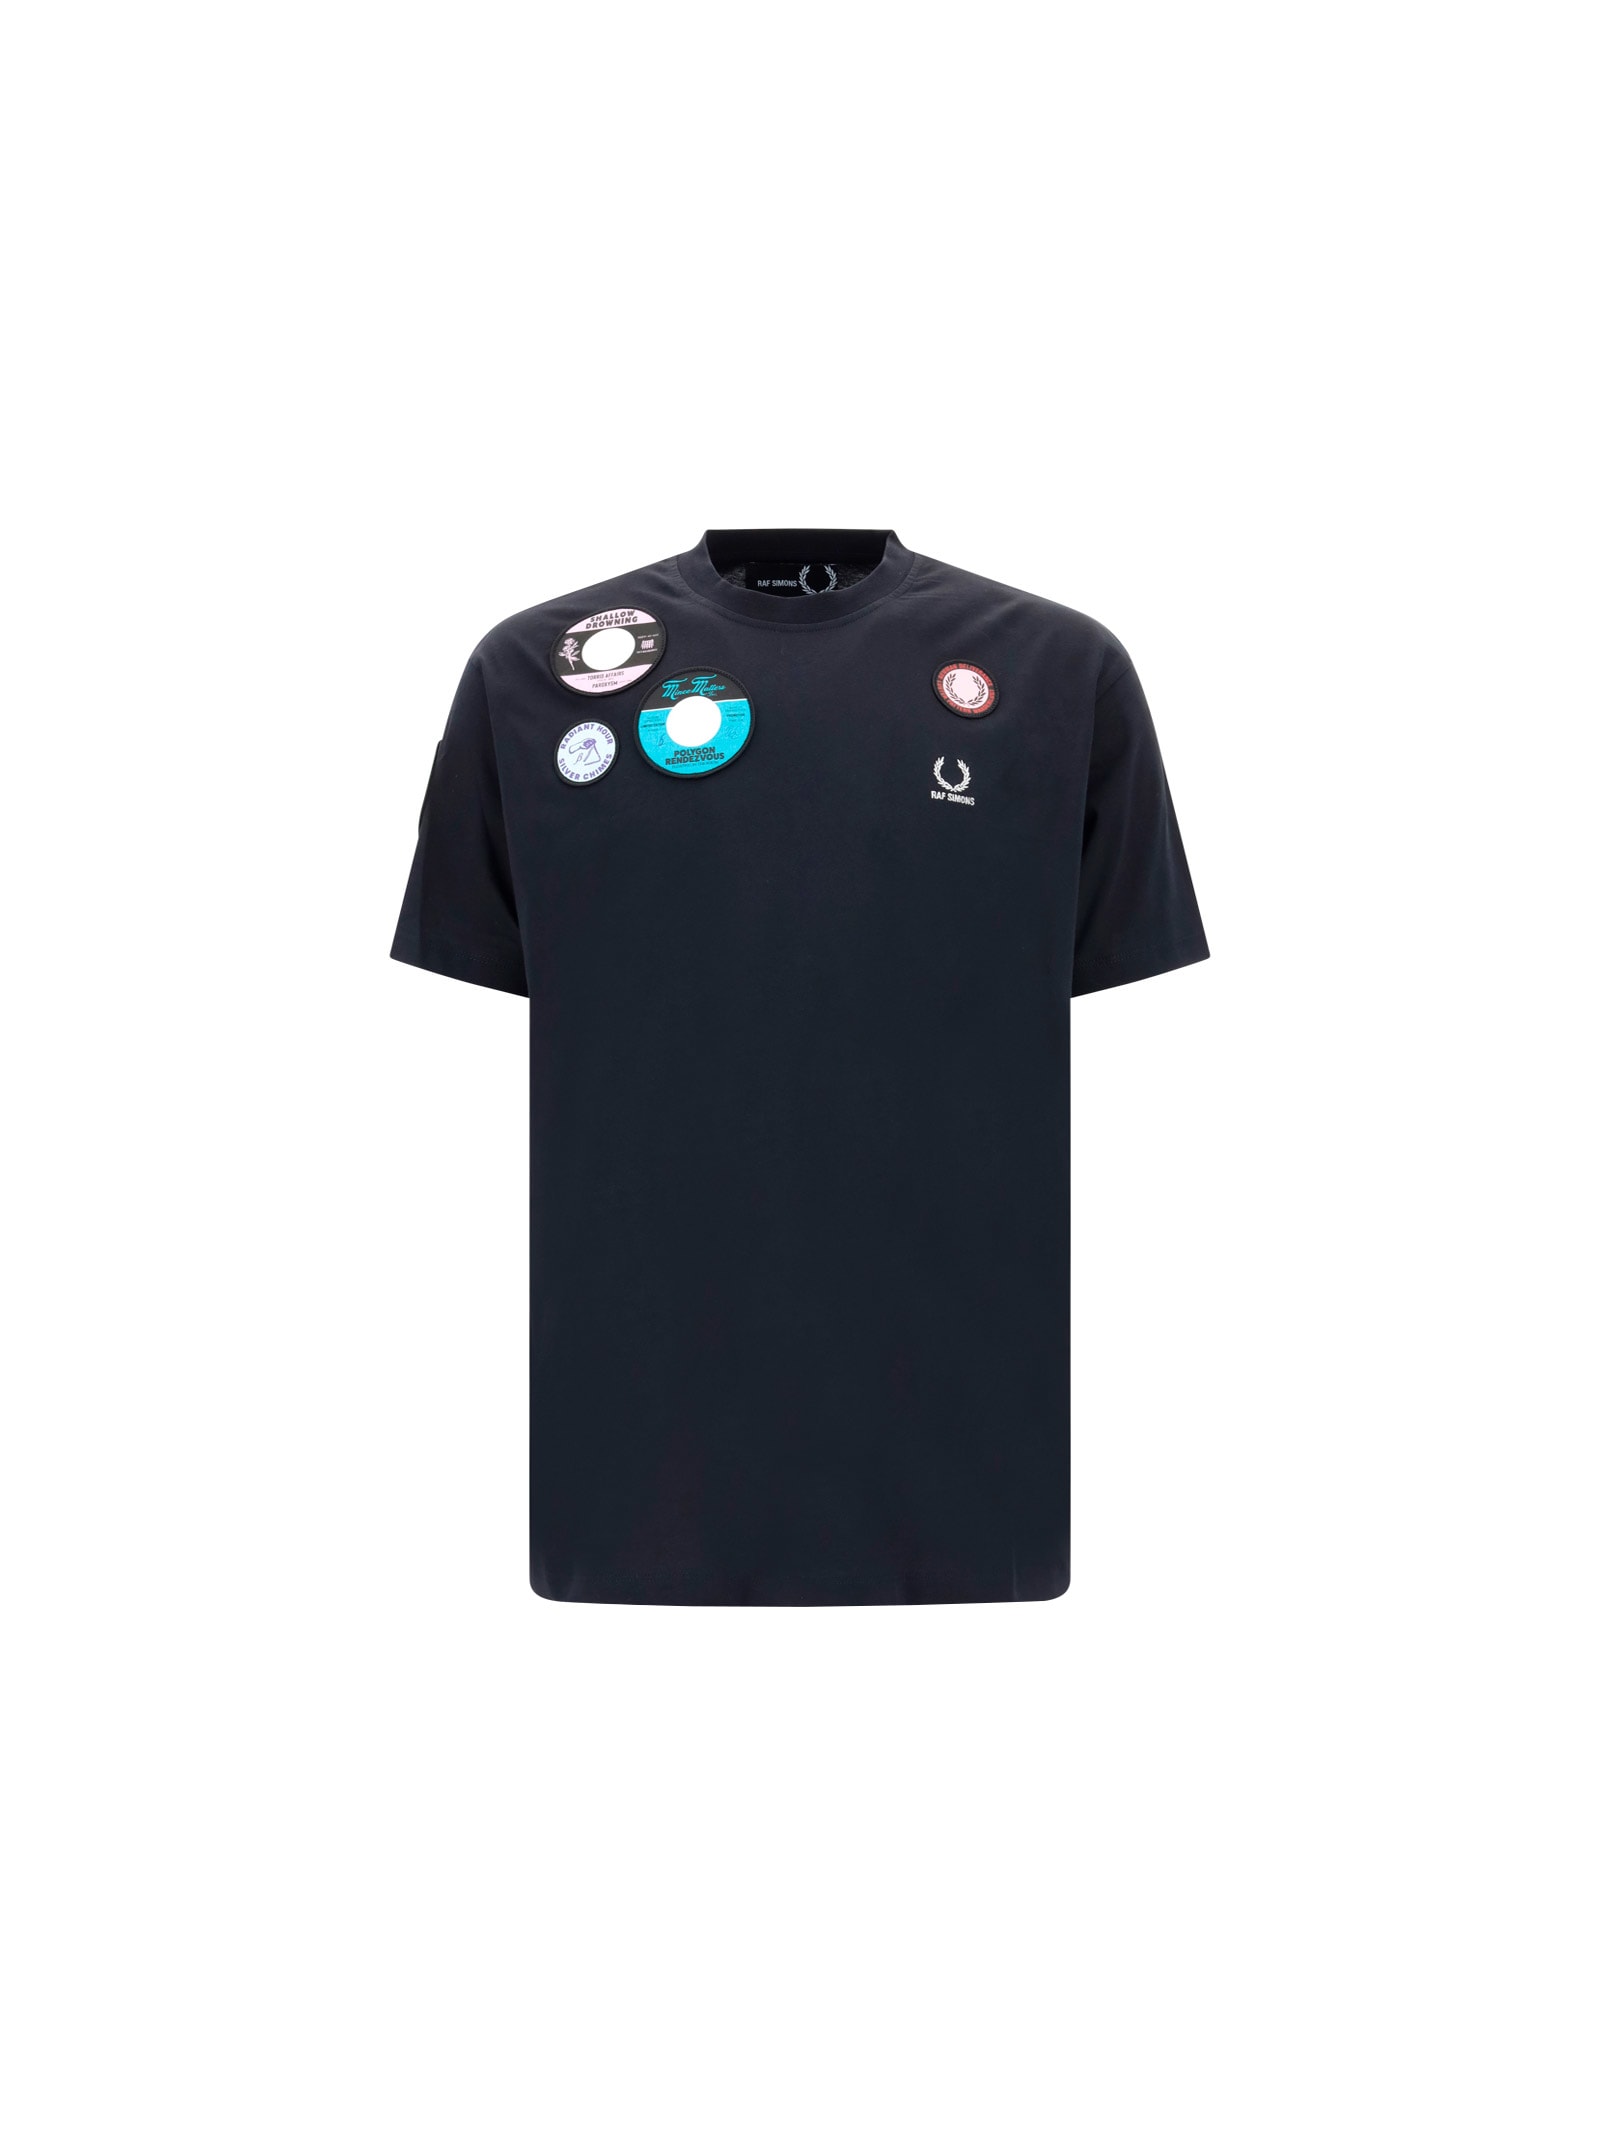 Fred Perry by Raf Simons Oversize T-shirt